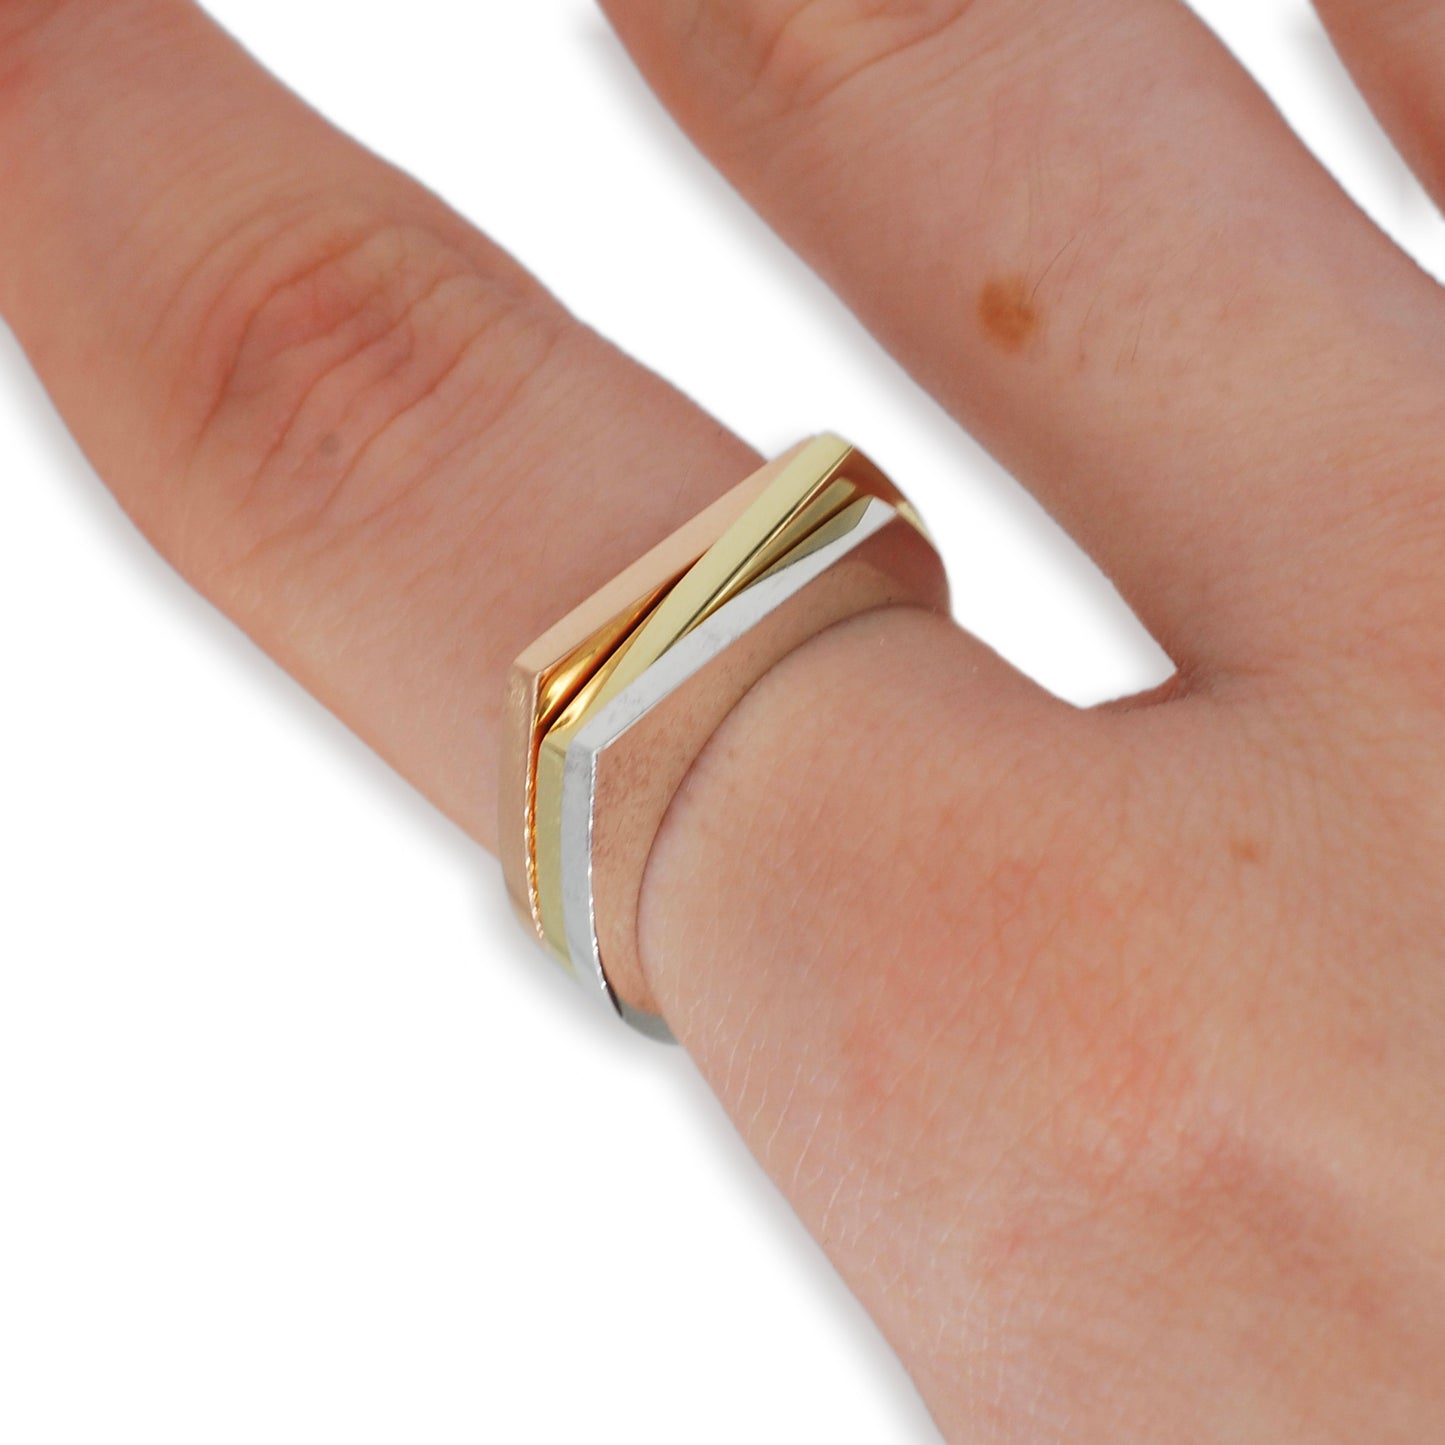 9ct Rose Gold Angled Signet Ring